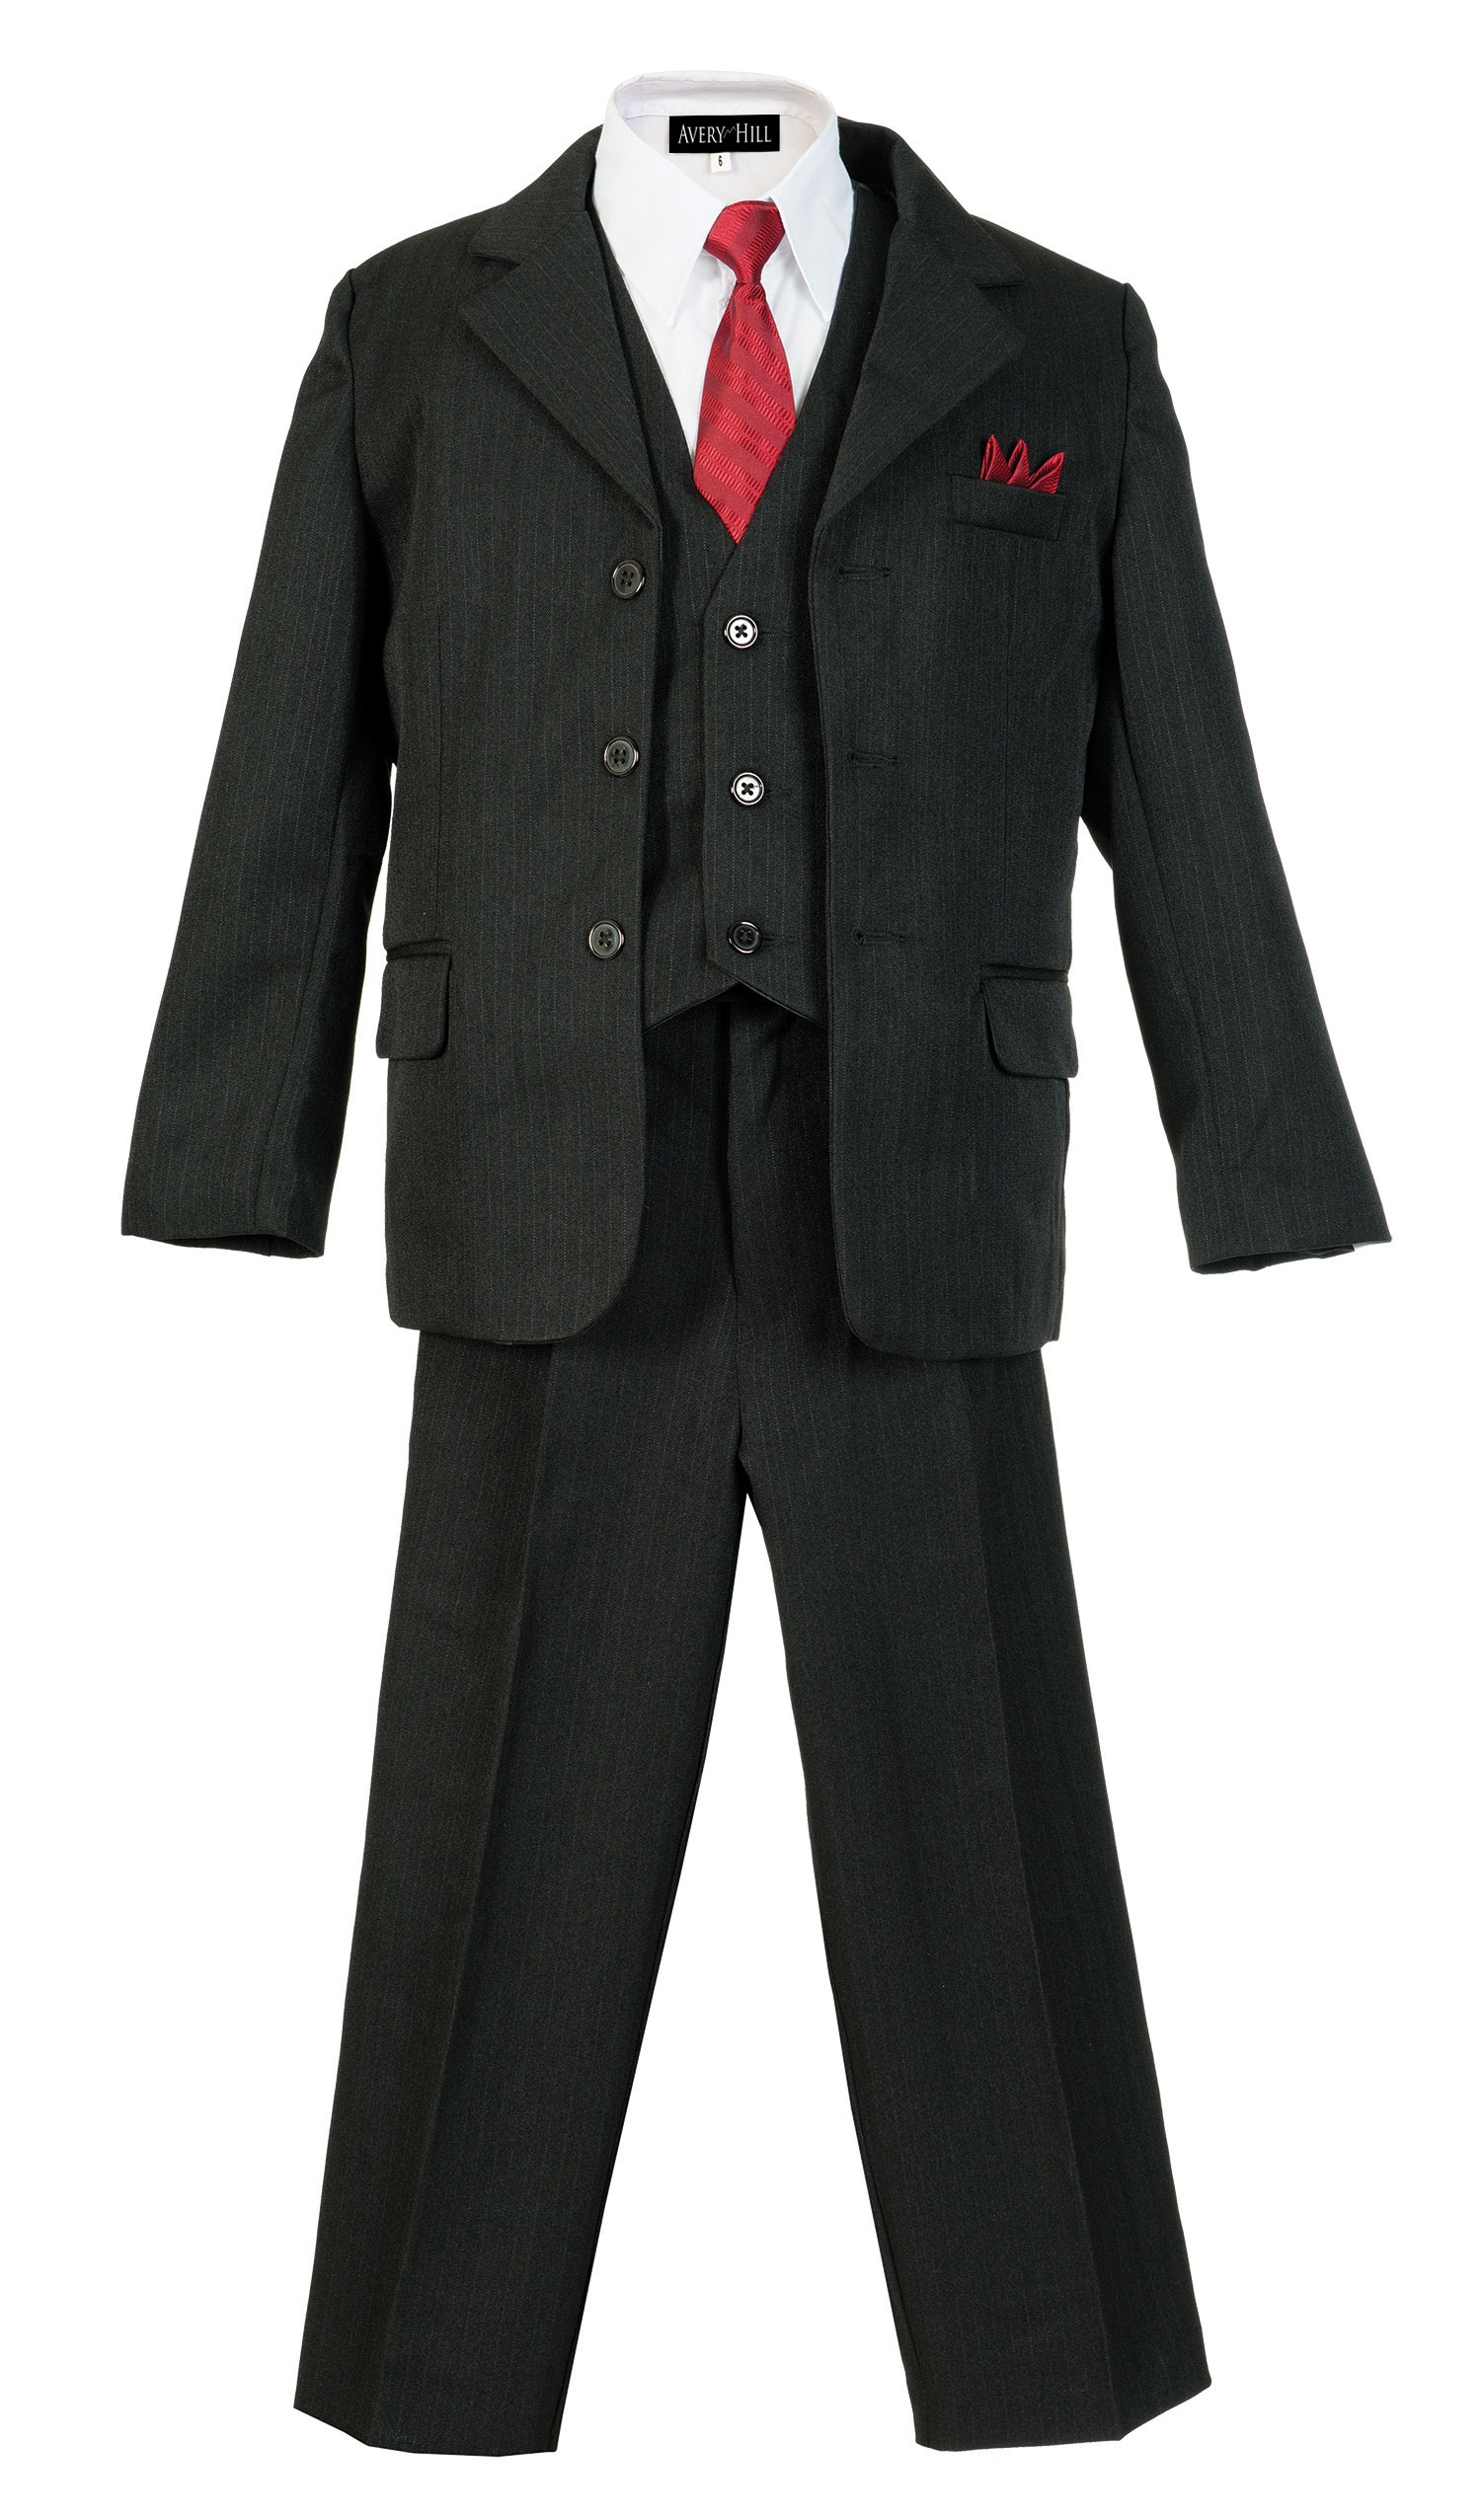 Boys Pinstripe Suit Set with Matching Tie BK 6